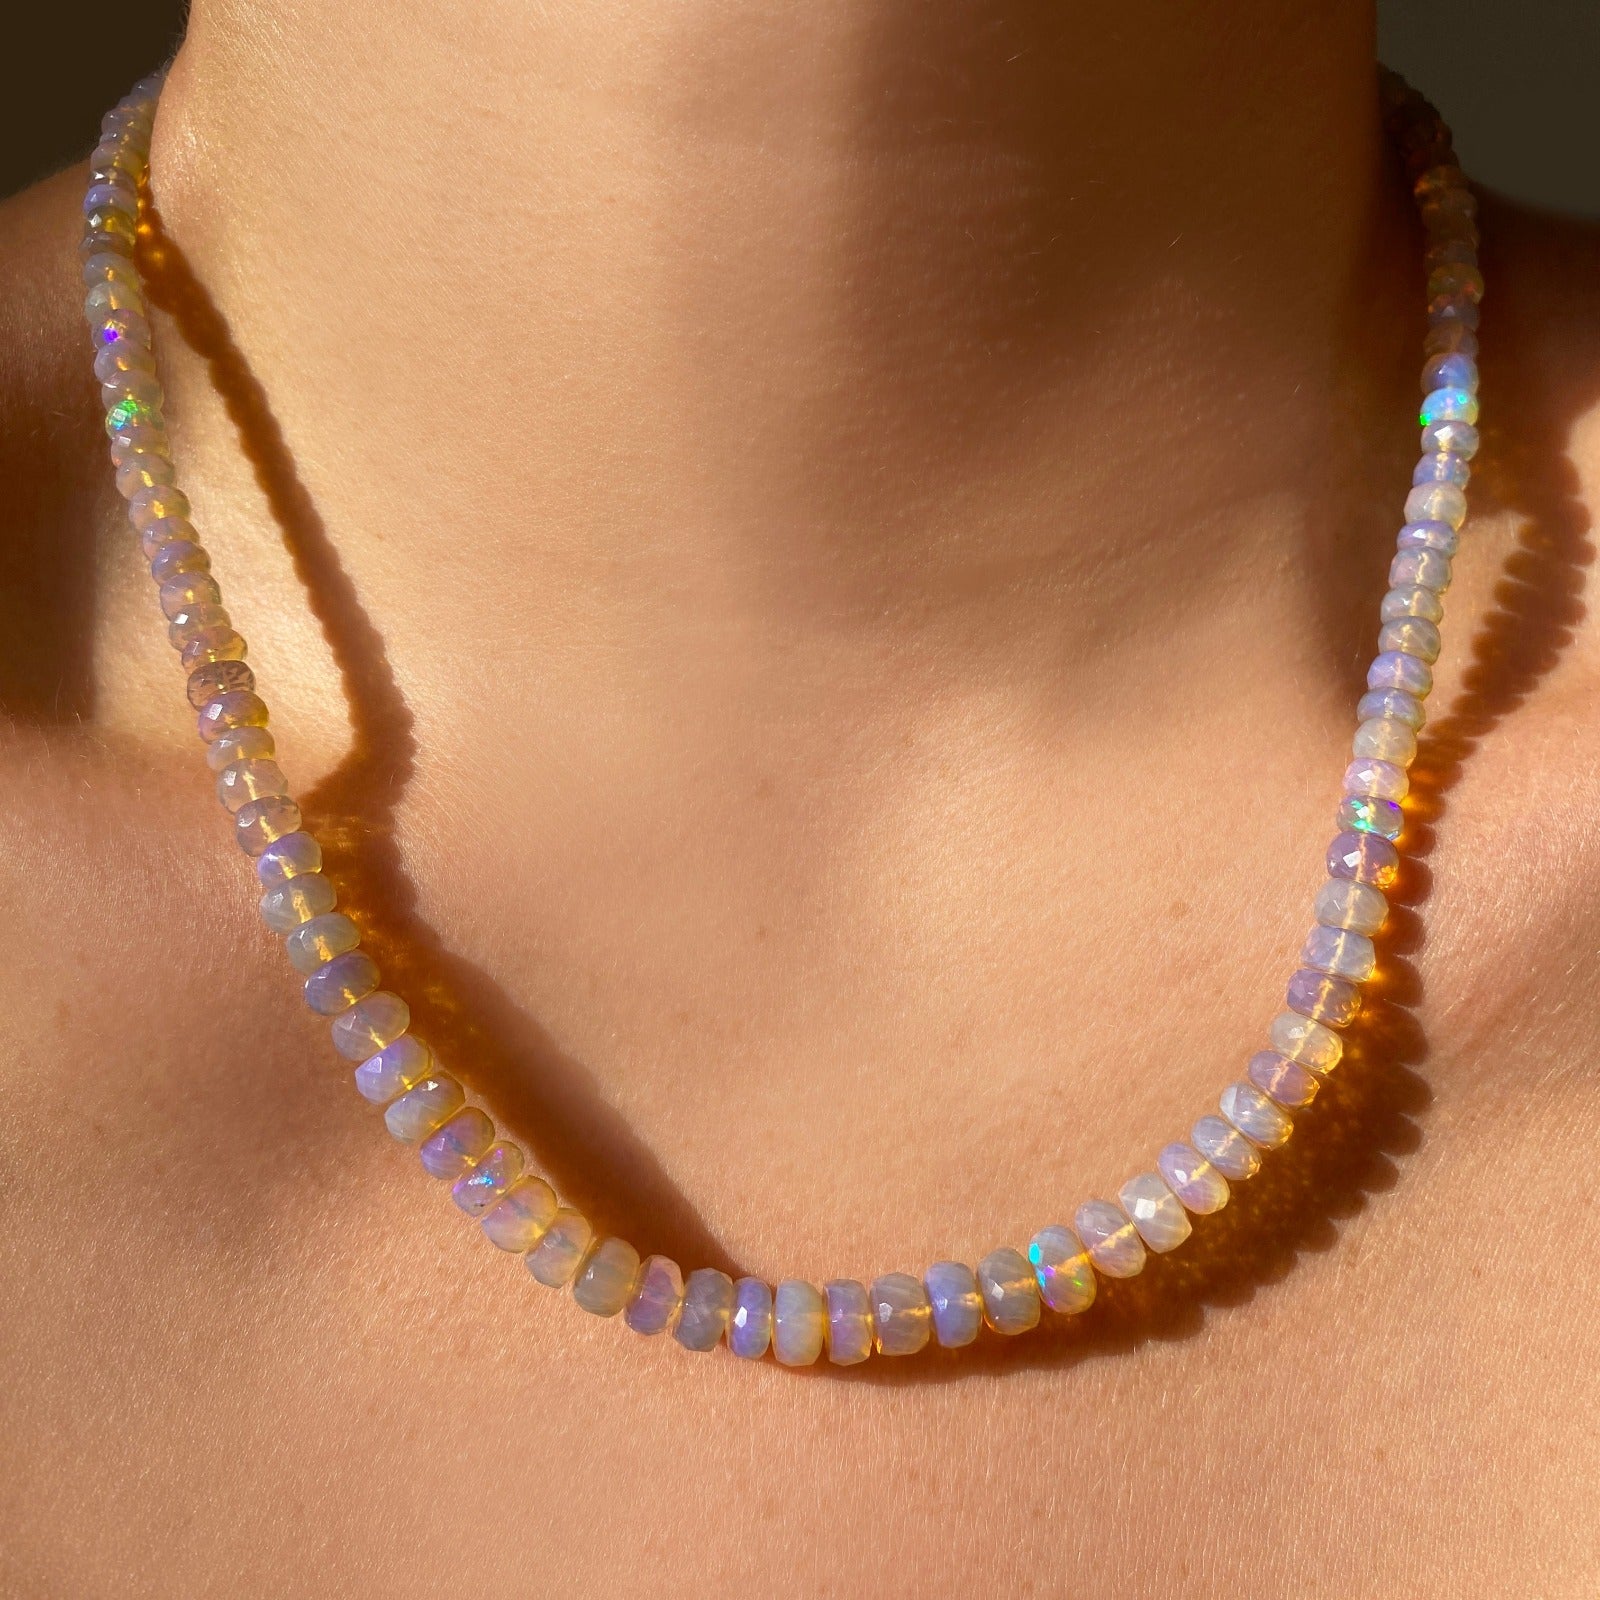 Shimmering beaded necklace made of faceted opals in shades of clear and light lilac on a gold linking ovals clasp. 